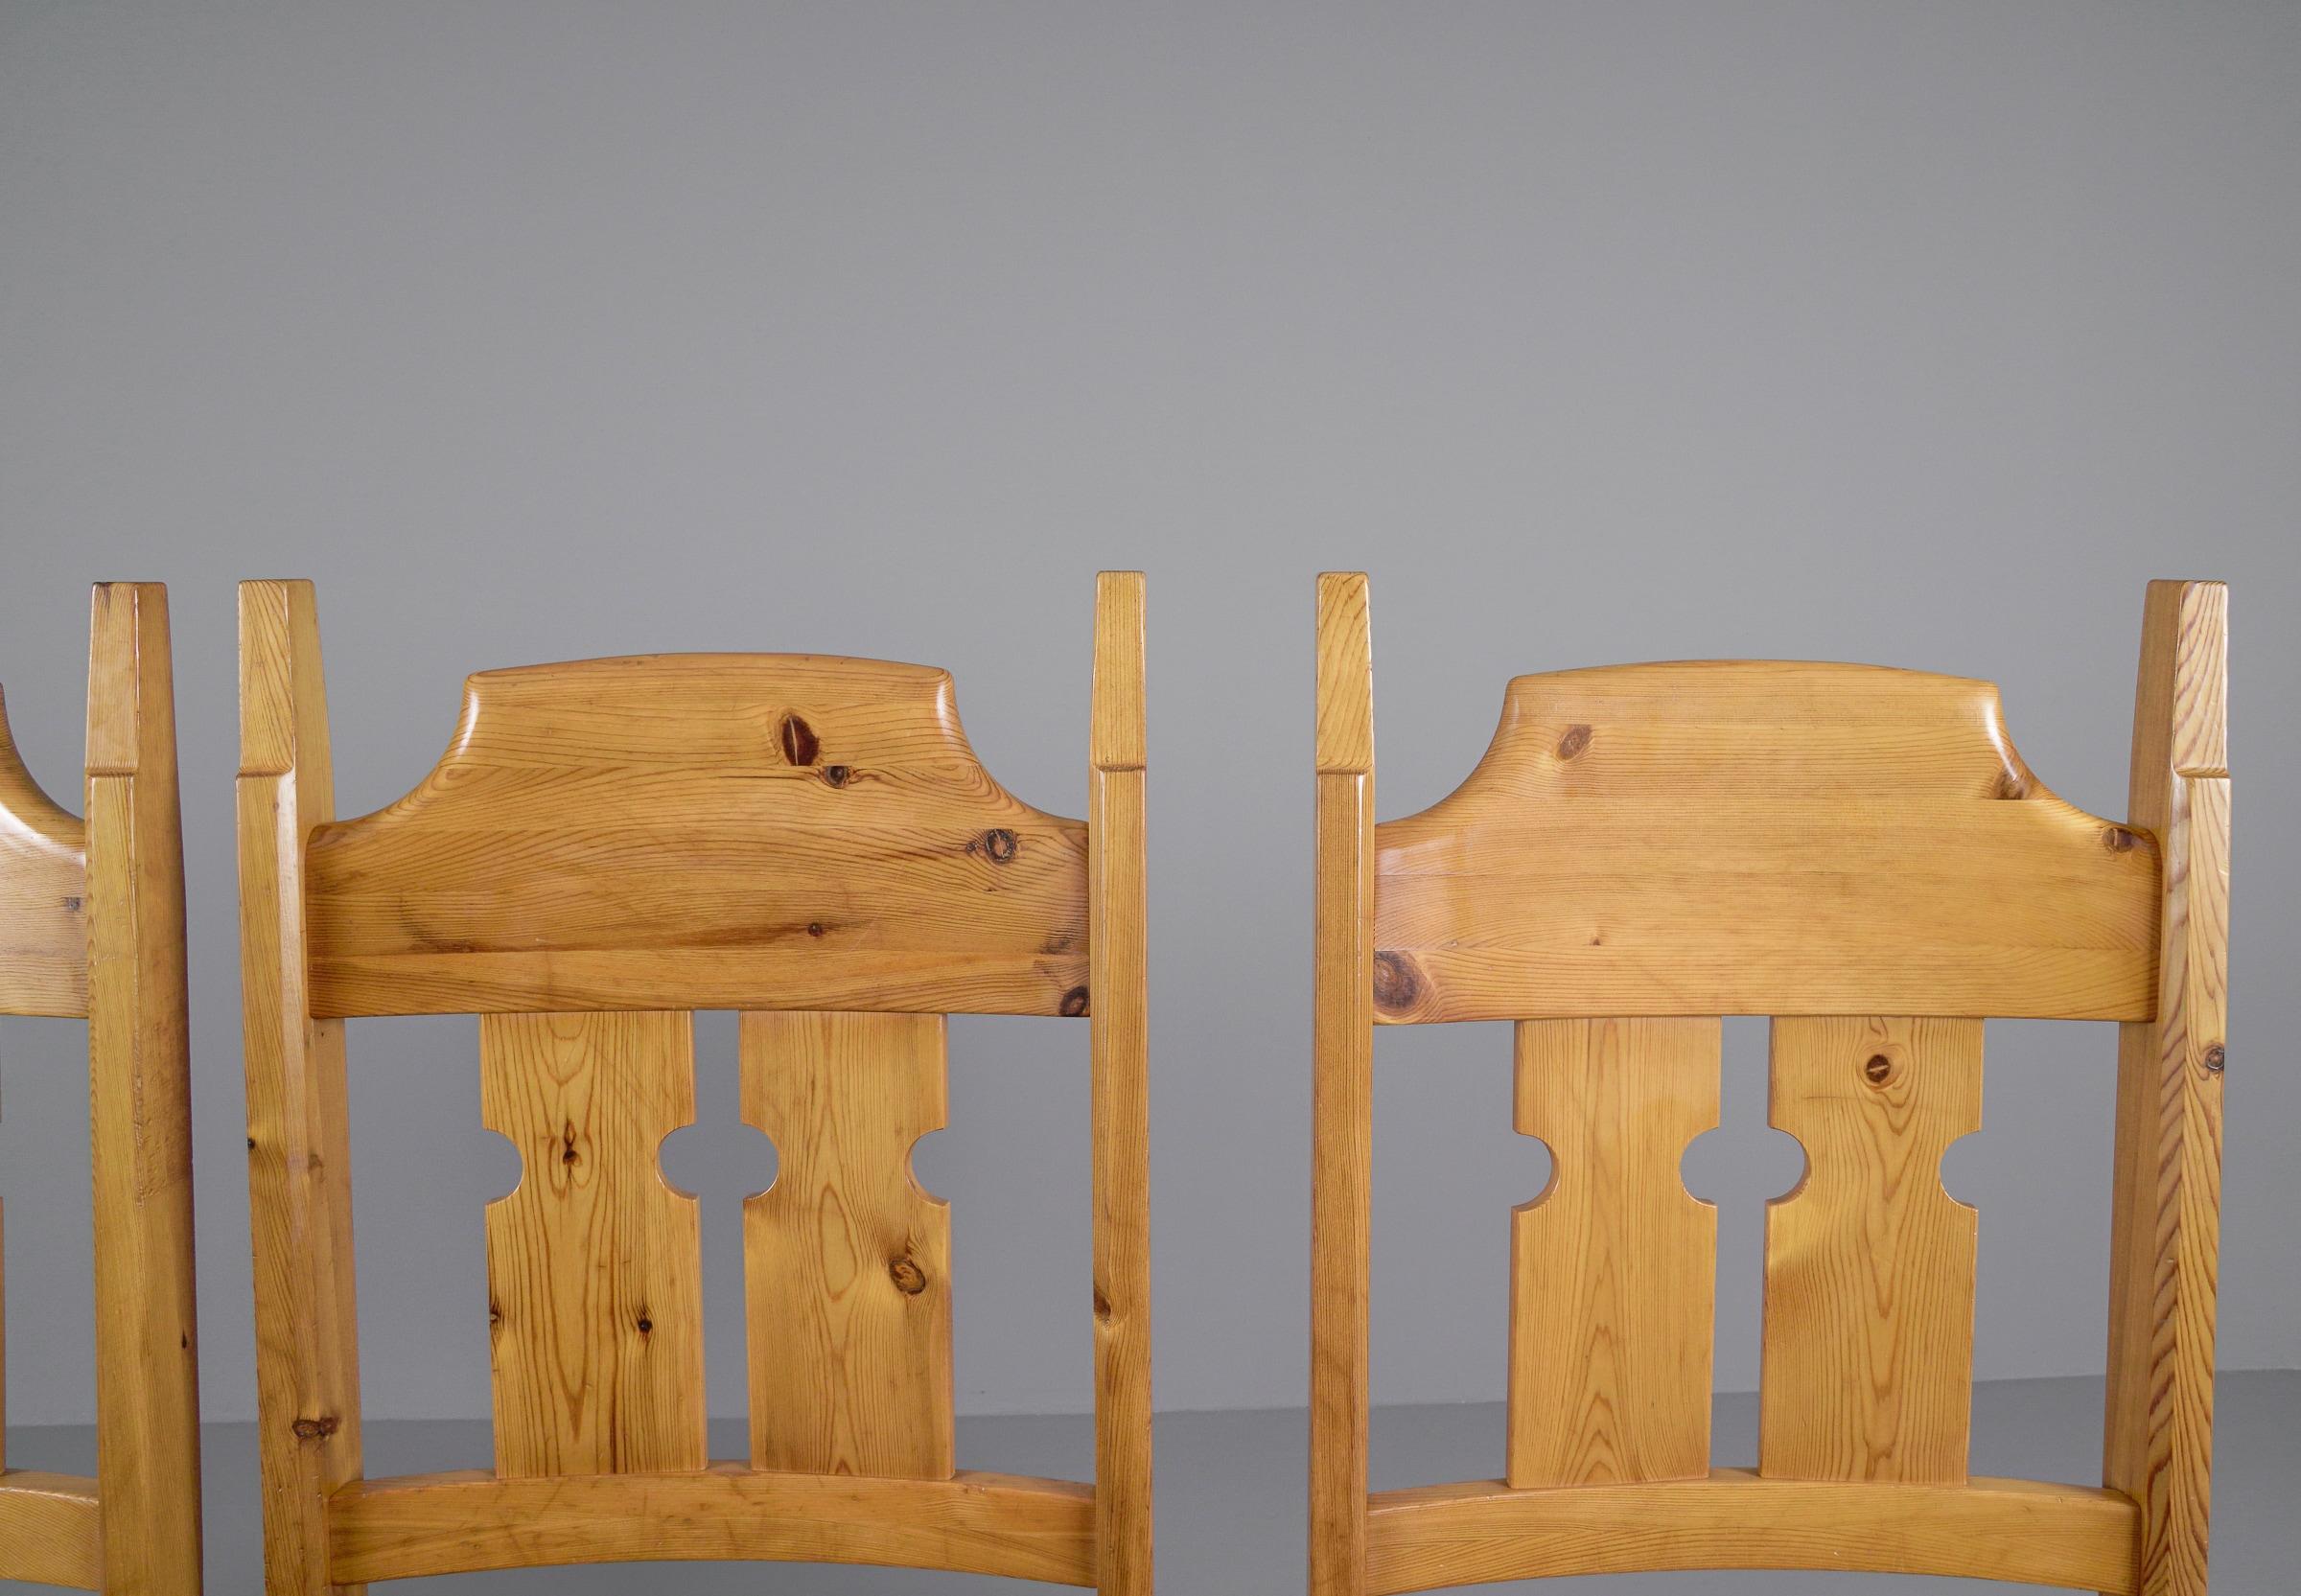  Set of 4 Swedish Pine Chairs by Gilbert Marklund for Furusnickarn AB, 1970s For Sale 2